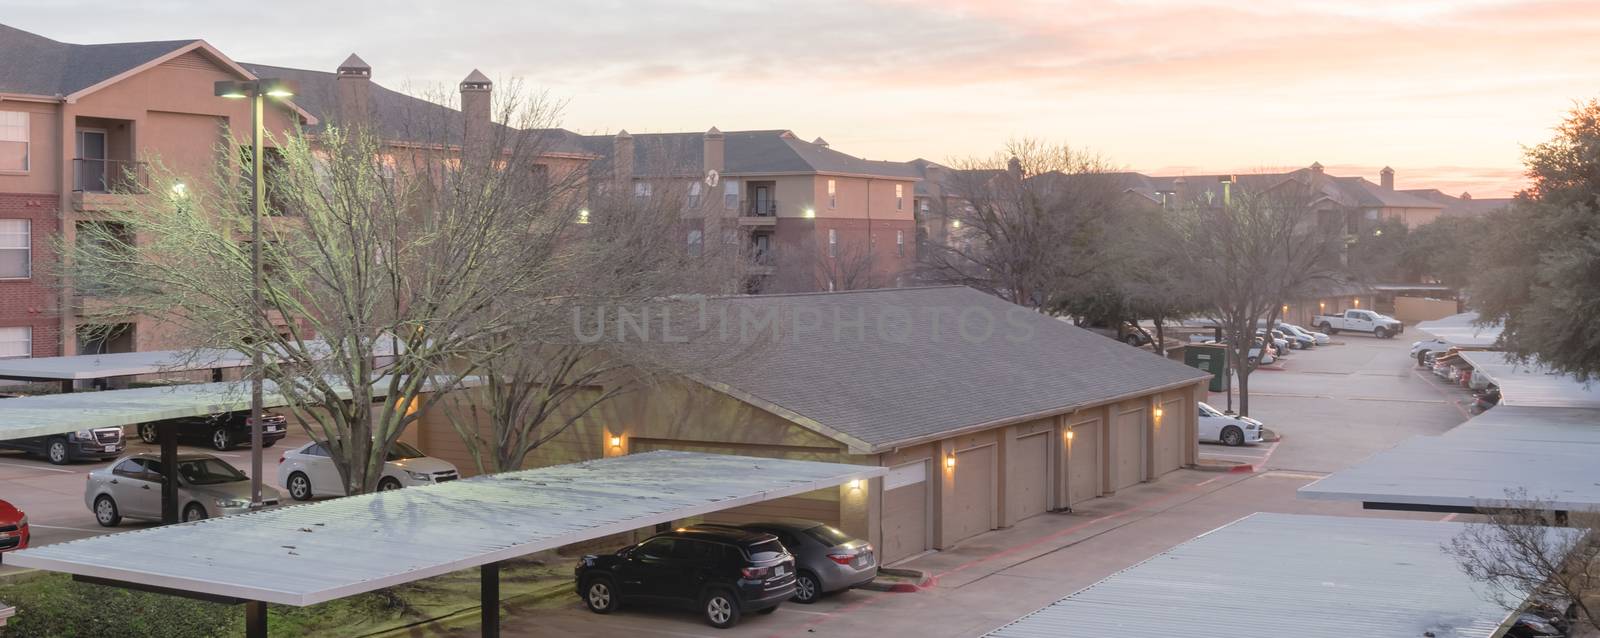 Panoramic view typical apartment complex with detached garage, covered parking lots at sunrise by trongnguyen